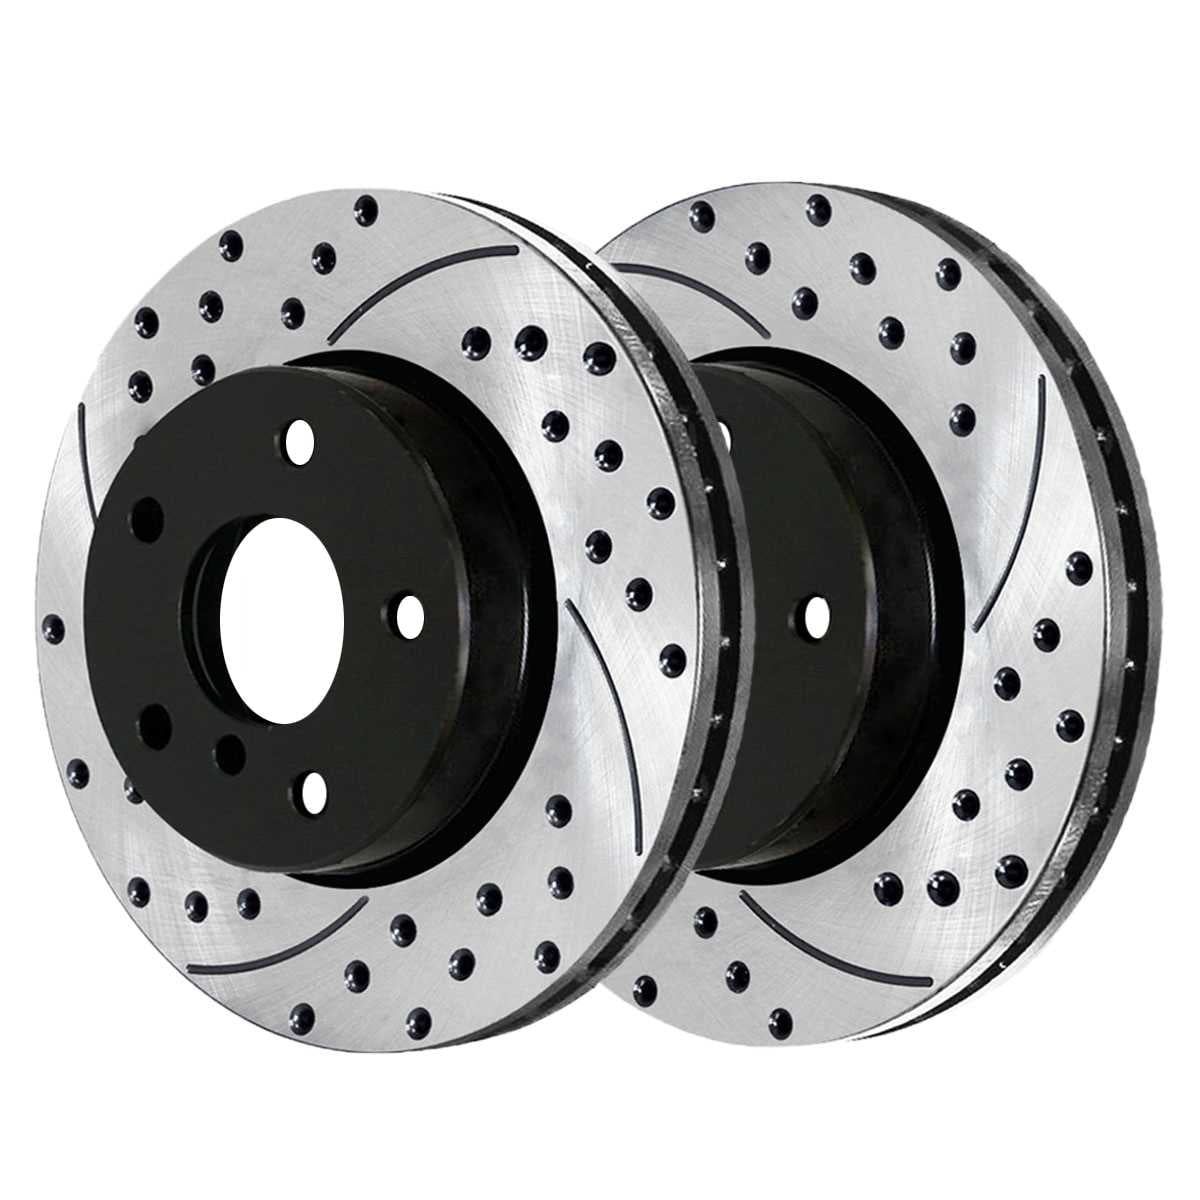 5lug 2 Cross-Drilled Disc Brake Rotors Front Rotors Odyssey High-End